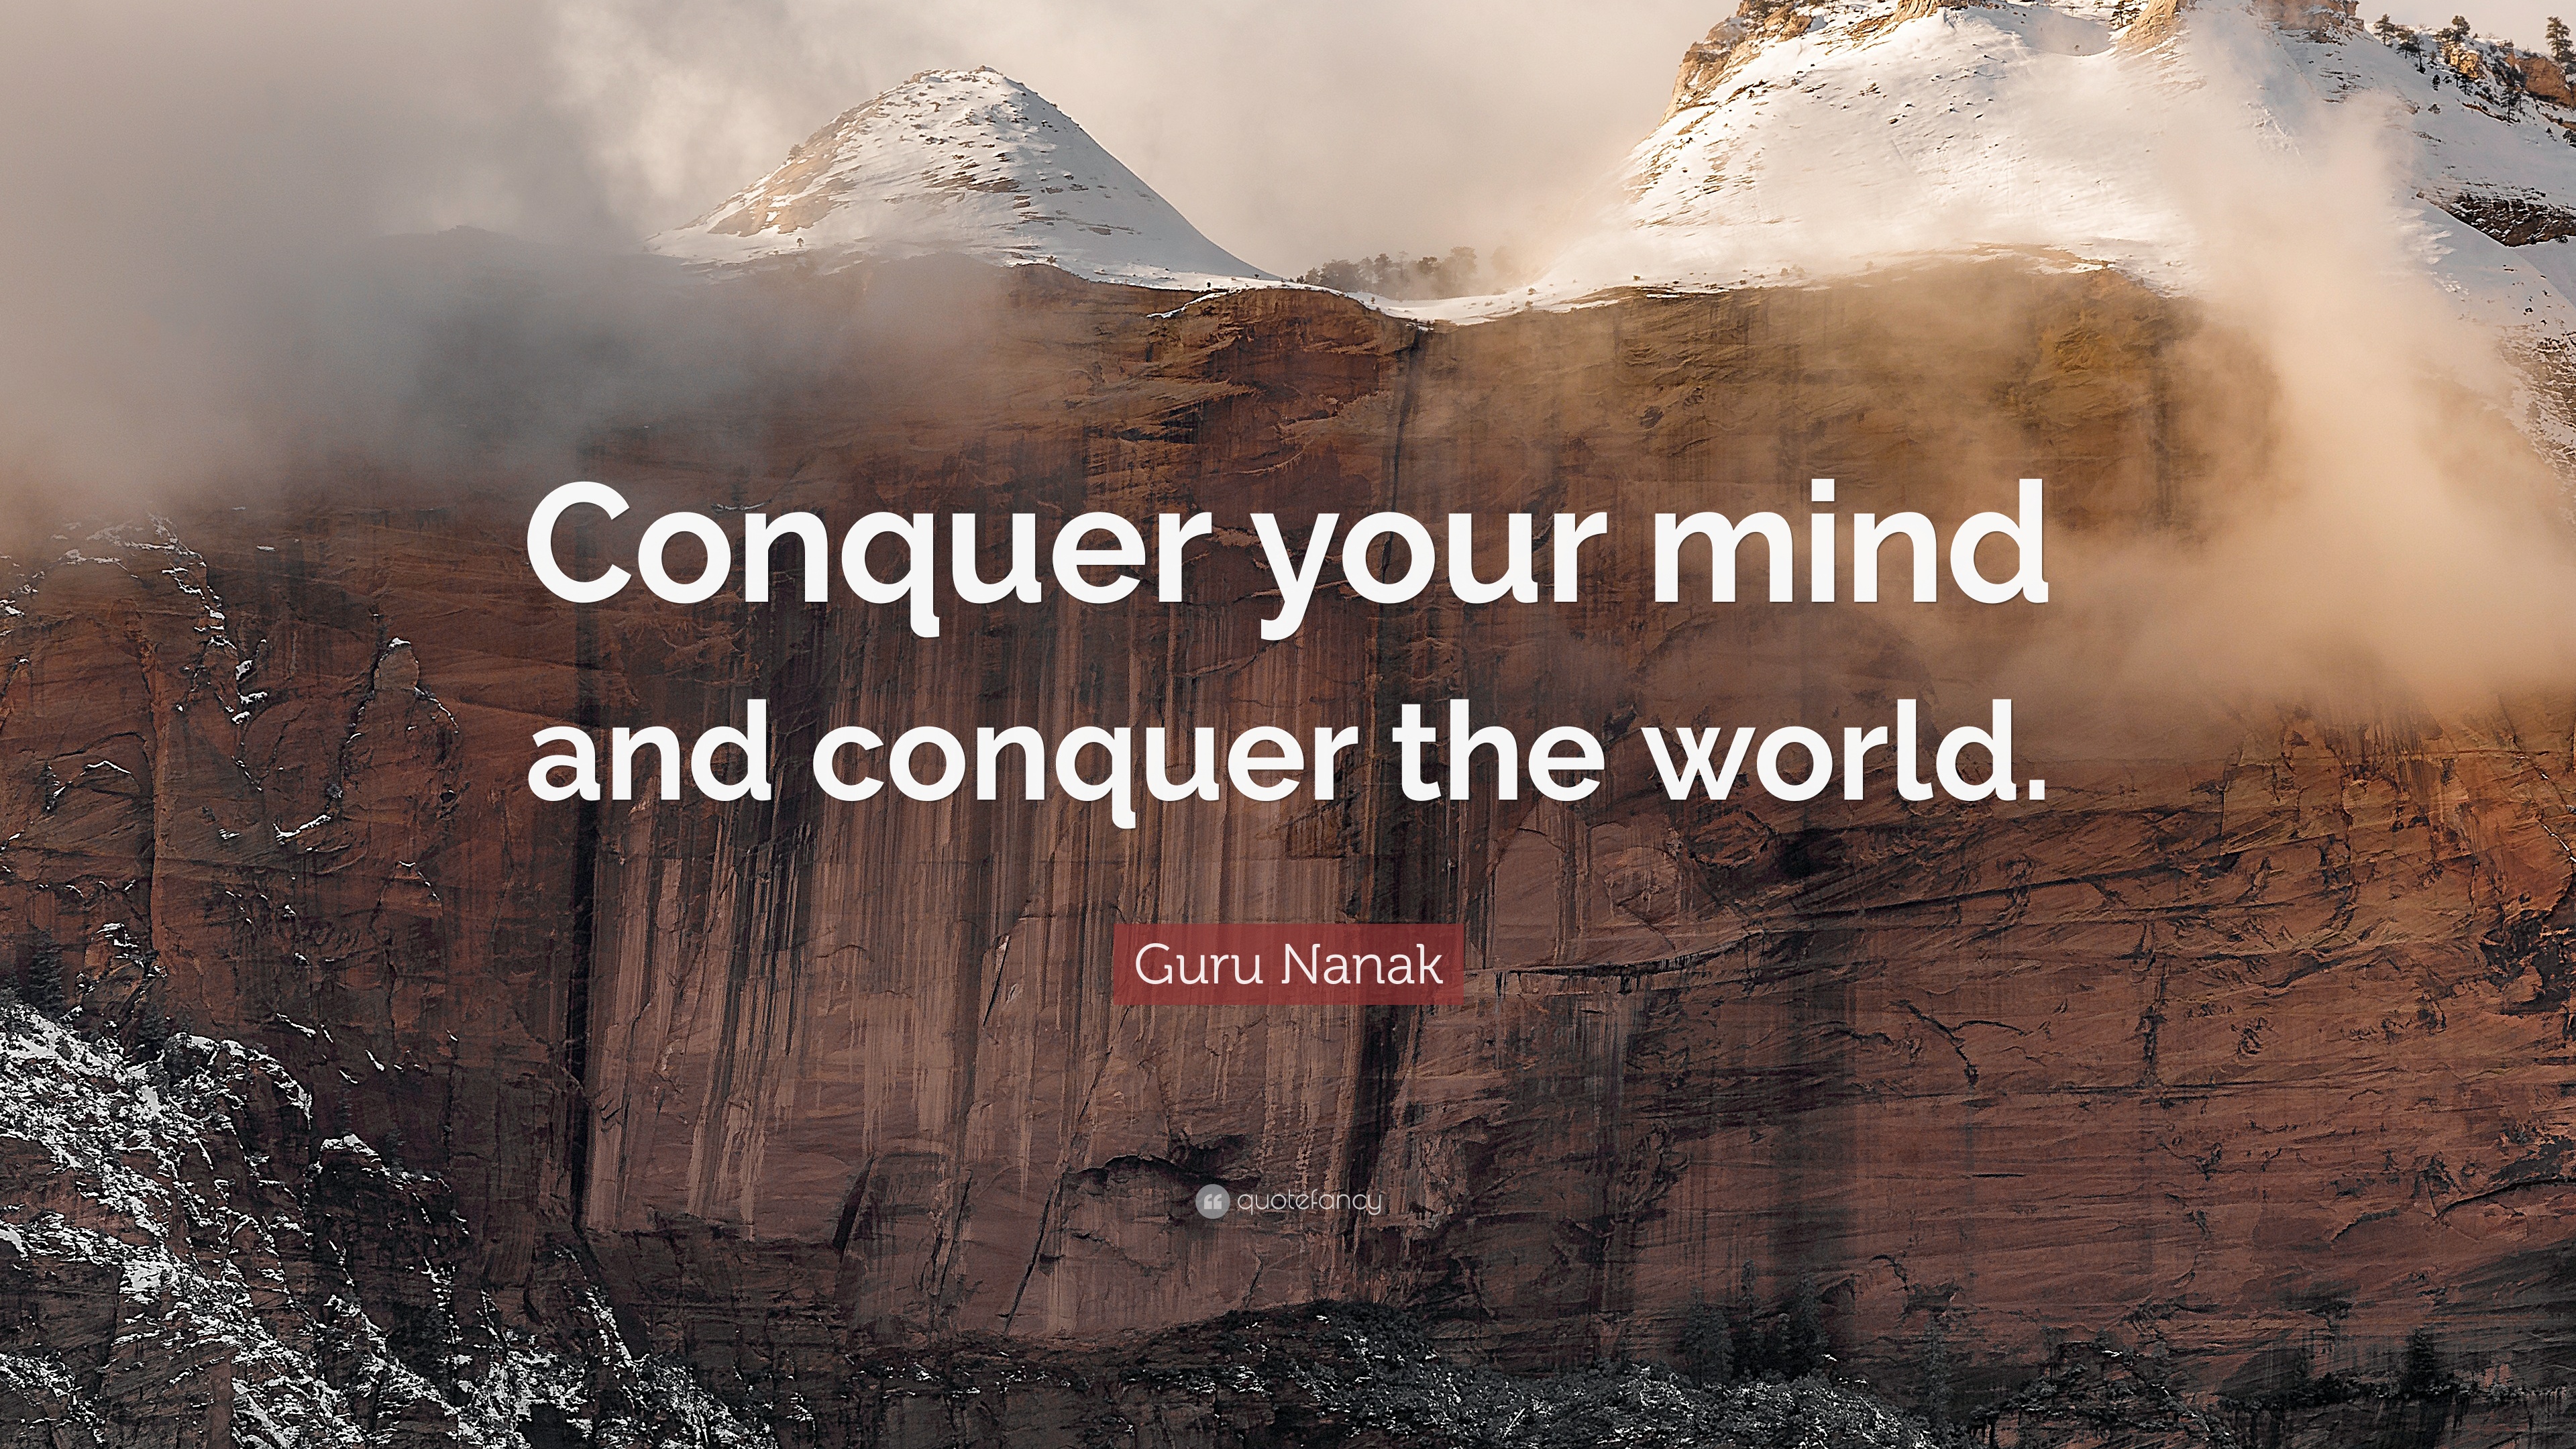 Keep Calm And Conquer The World 4k HD Desktop Wallpaper For